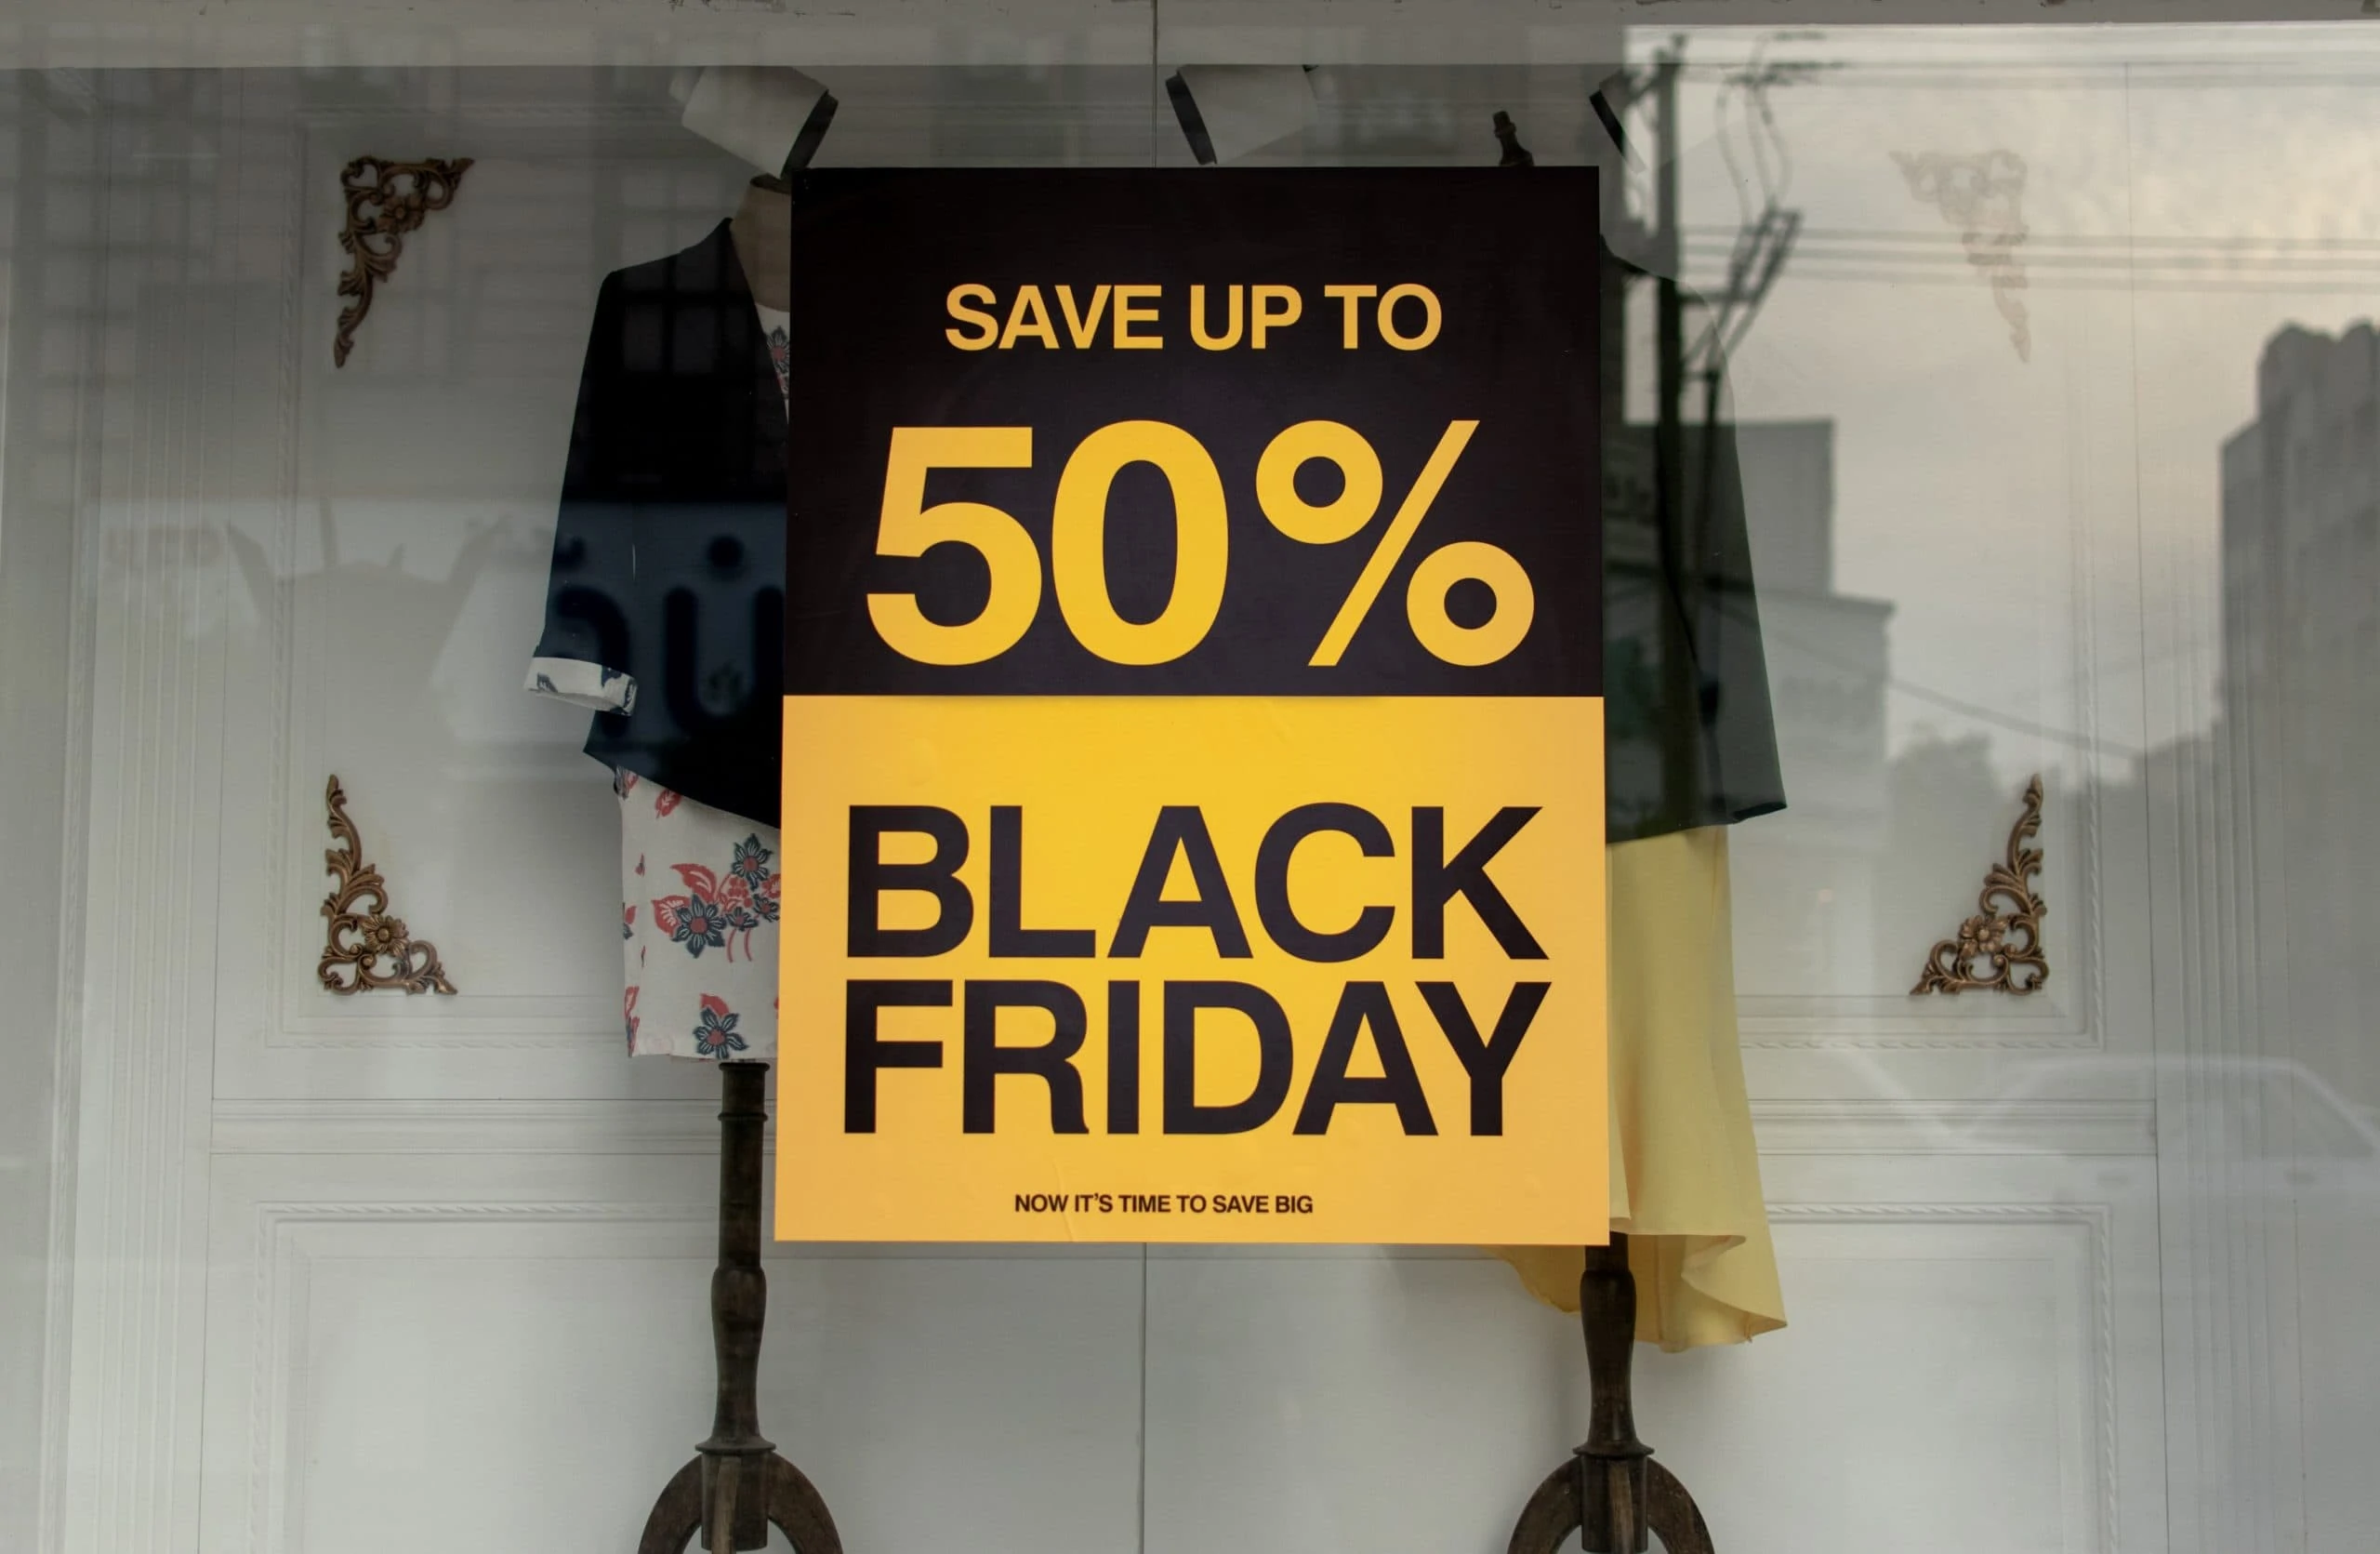 Save up to 50%. Black Friday.